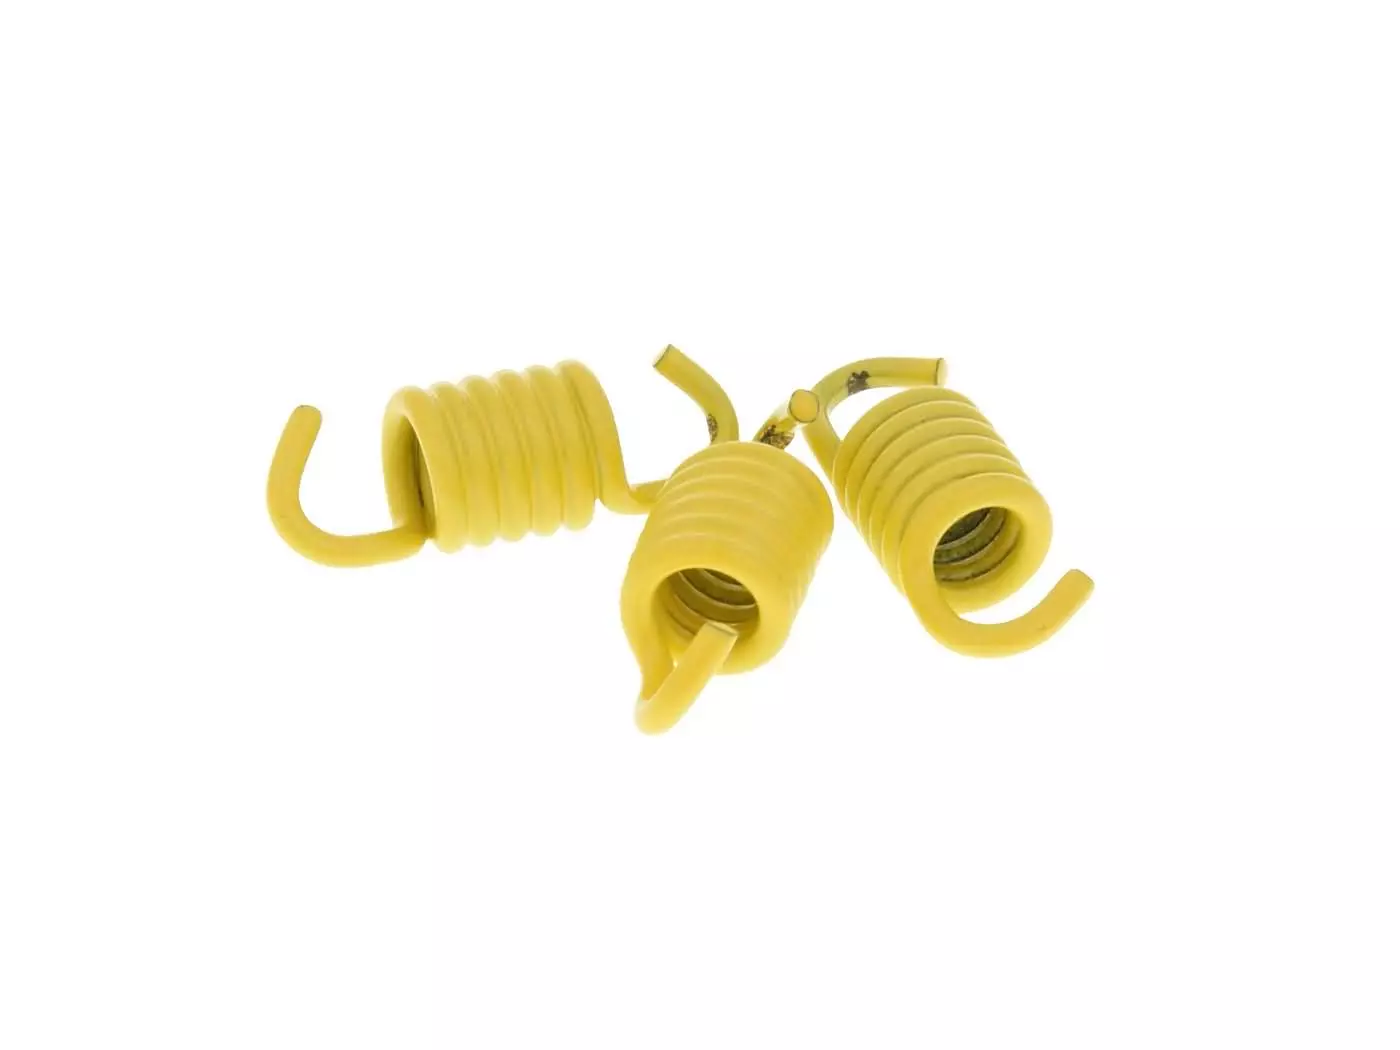 Clutch Springs Malossi Fly / MHR Delta Clutch Yellow 1.8mm Racing For Kymco, Peugeot, Piaggio